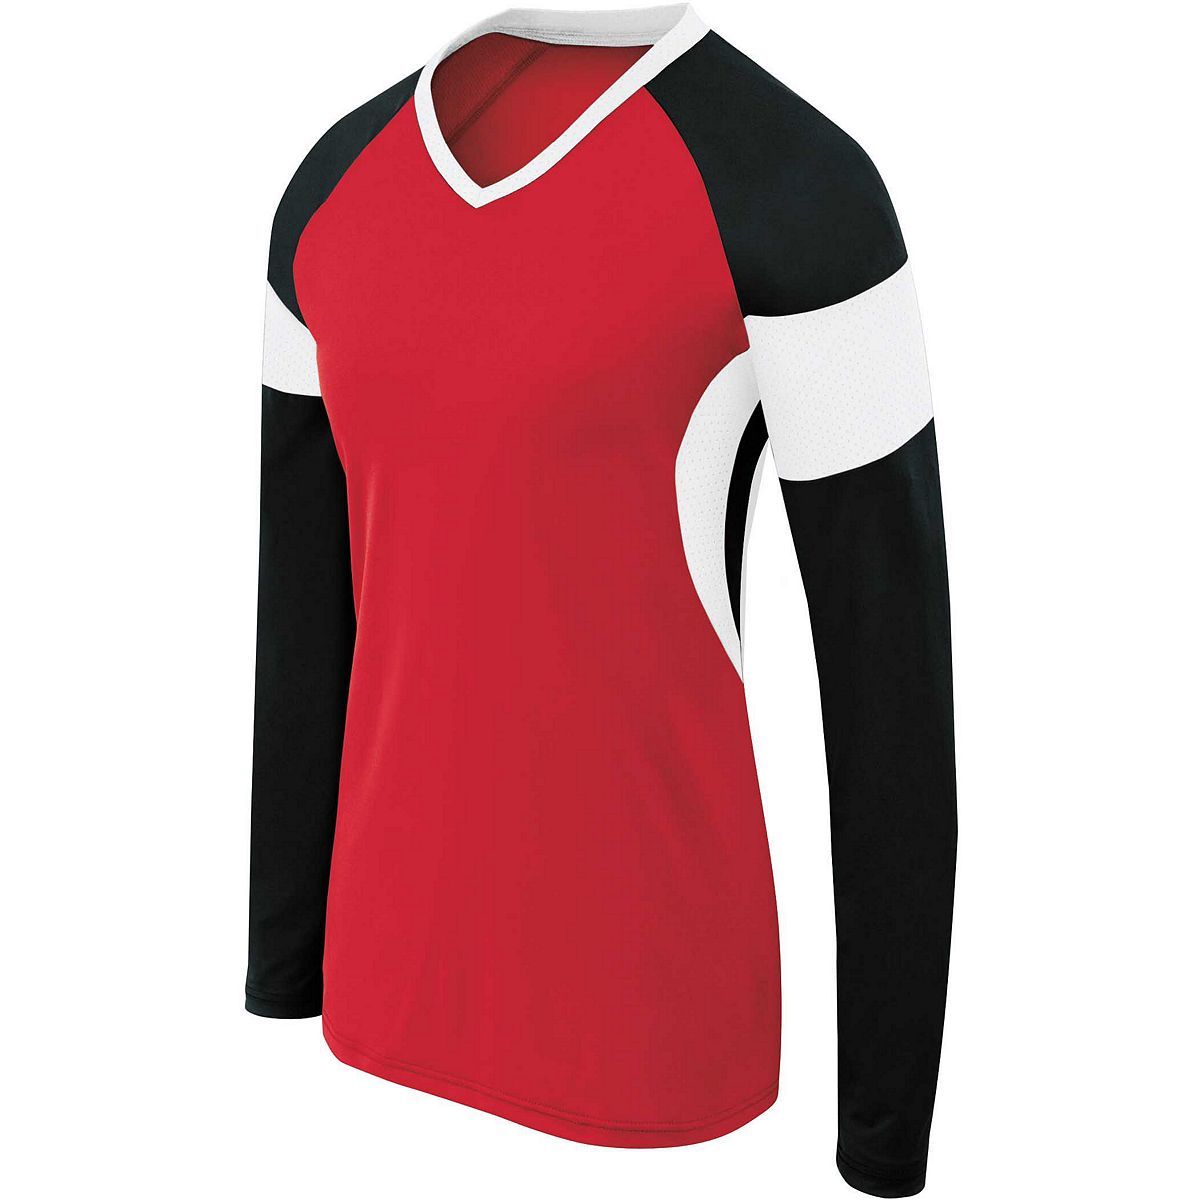 High 5 Ladies Long Sleeve Raptor Jersey in Scarlet/Black/White  -Part of the Ladies, Ladies-Jersey, High5-Products, Volleyball, Shirts product lines at KanaleyCreations.com